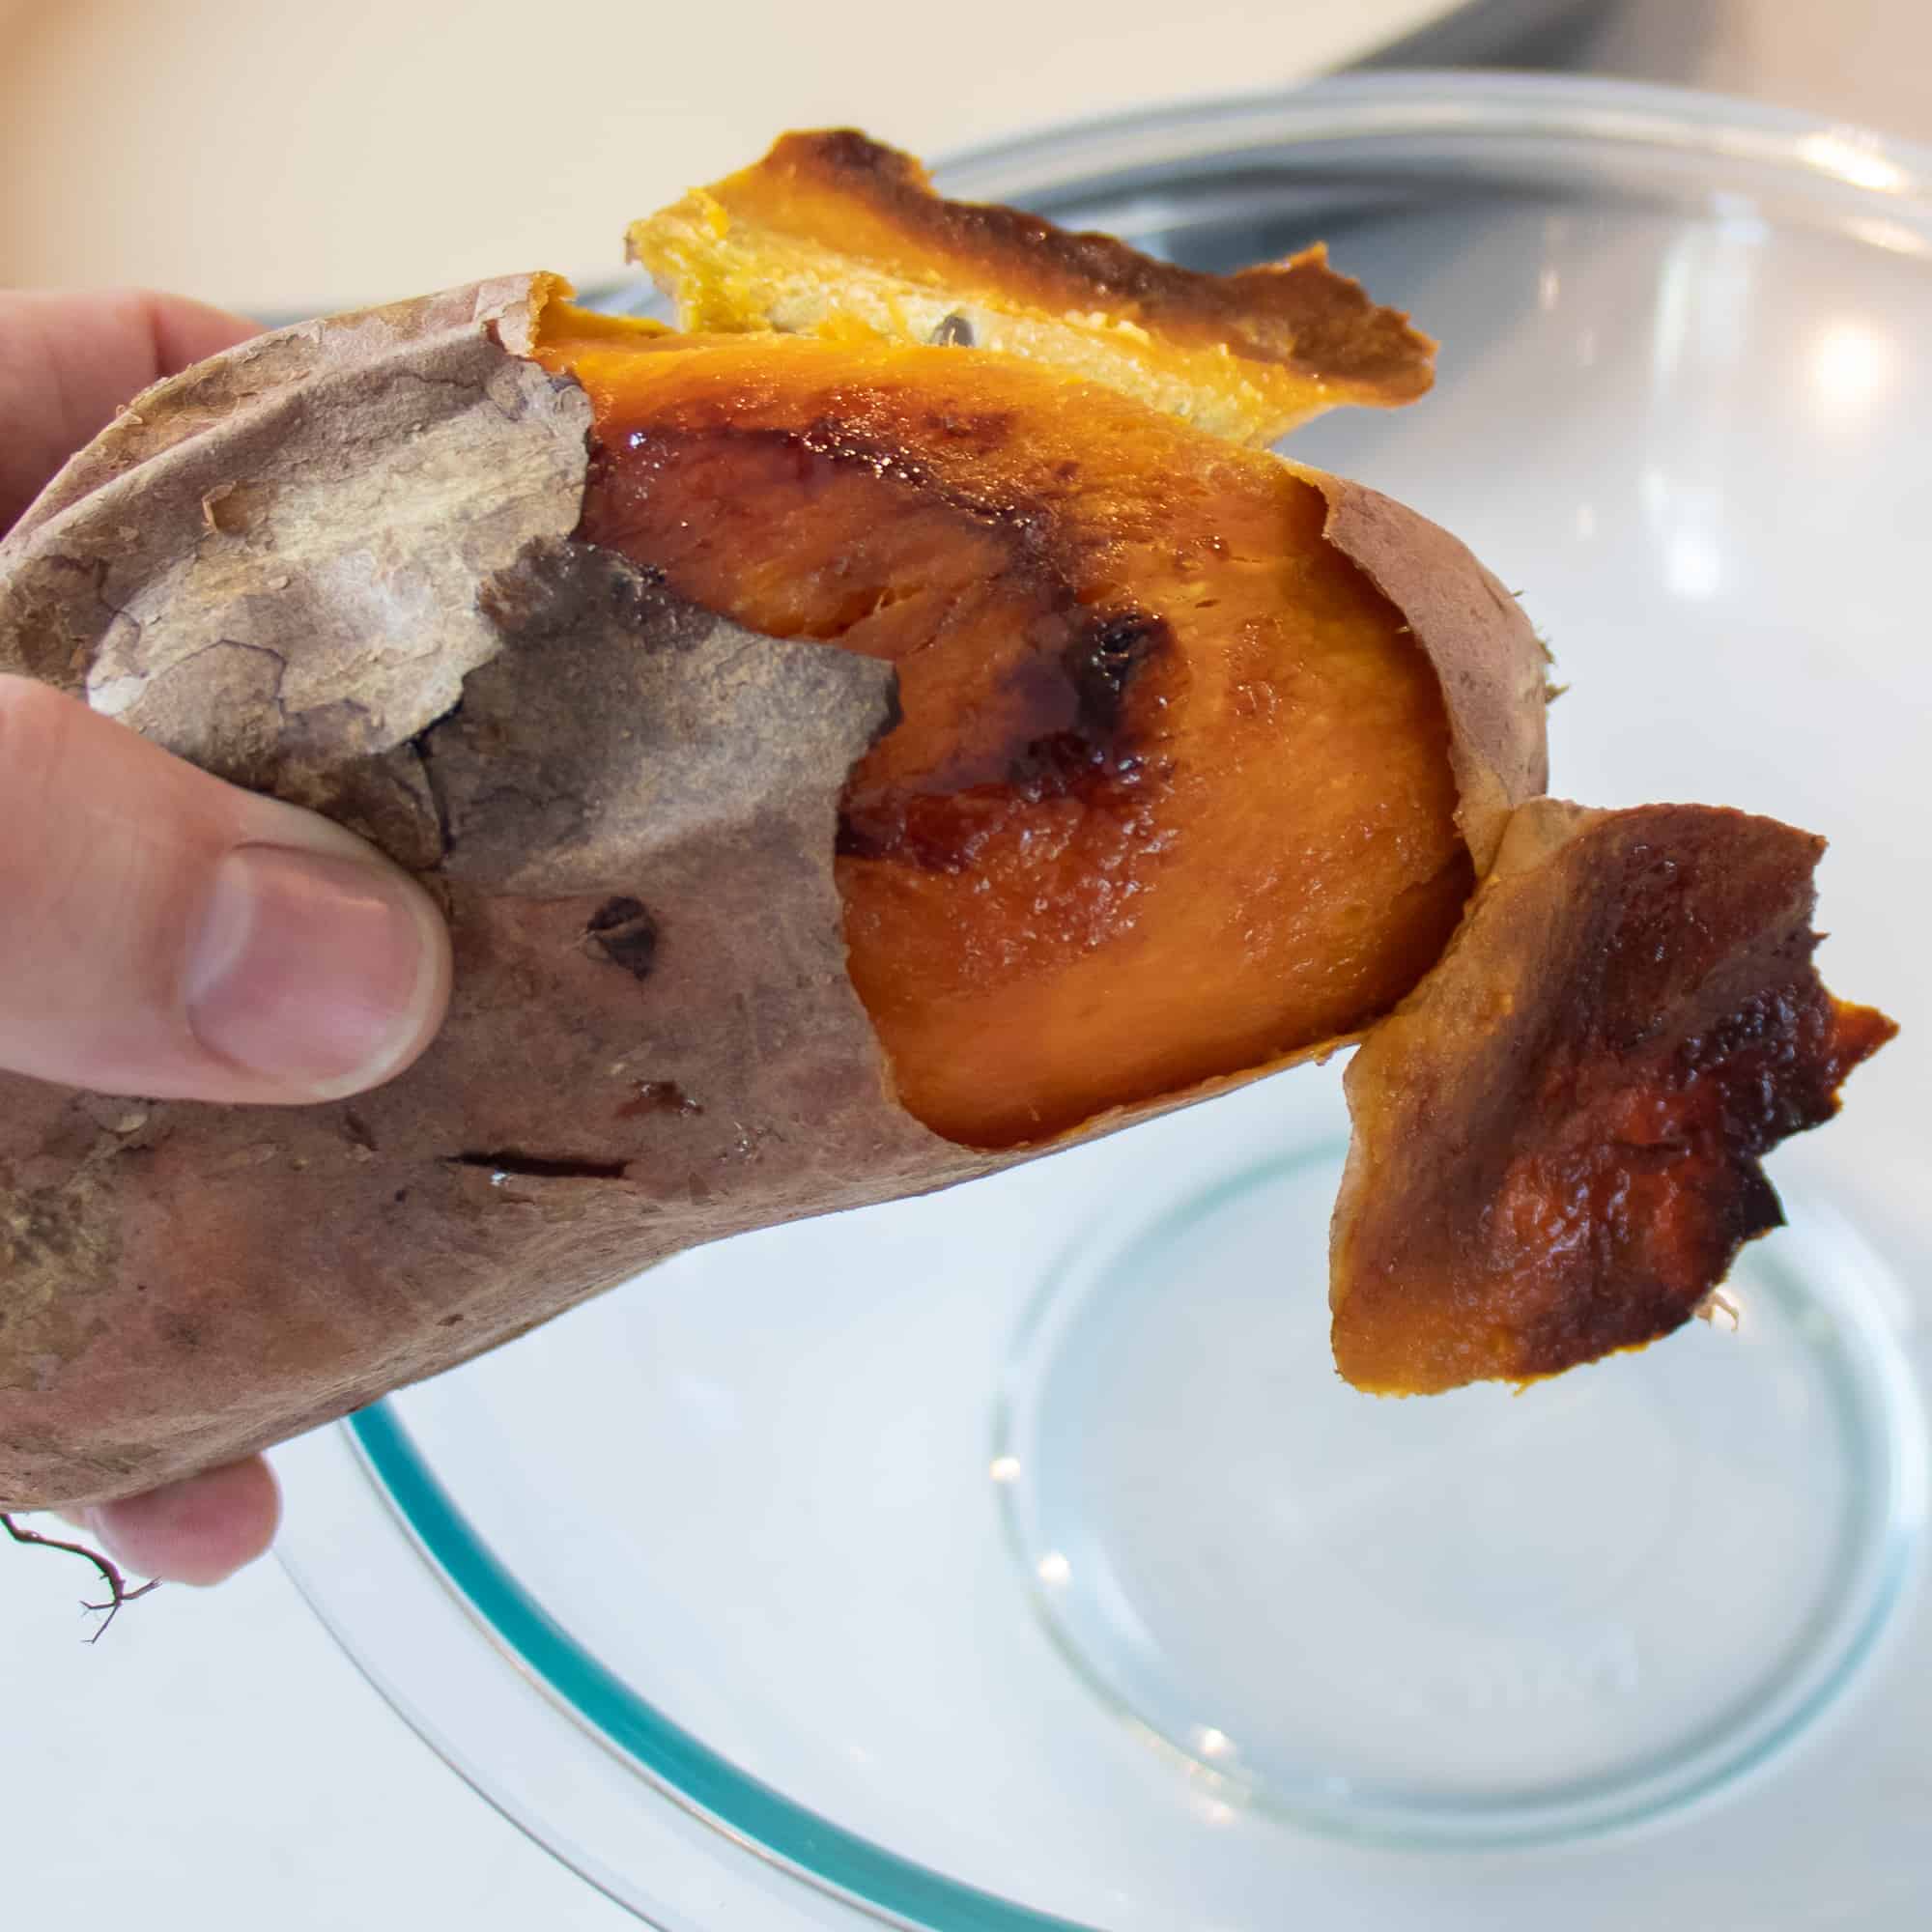 Once the sweet potatoes are baked, the skin can peel off easily